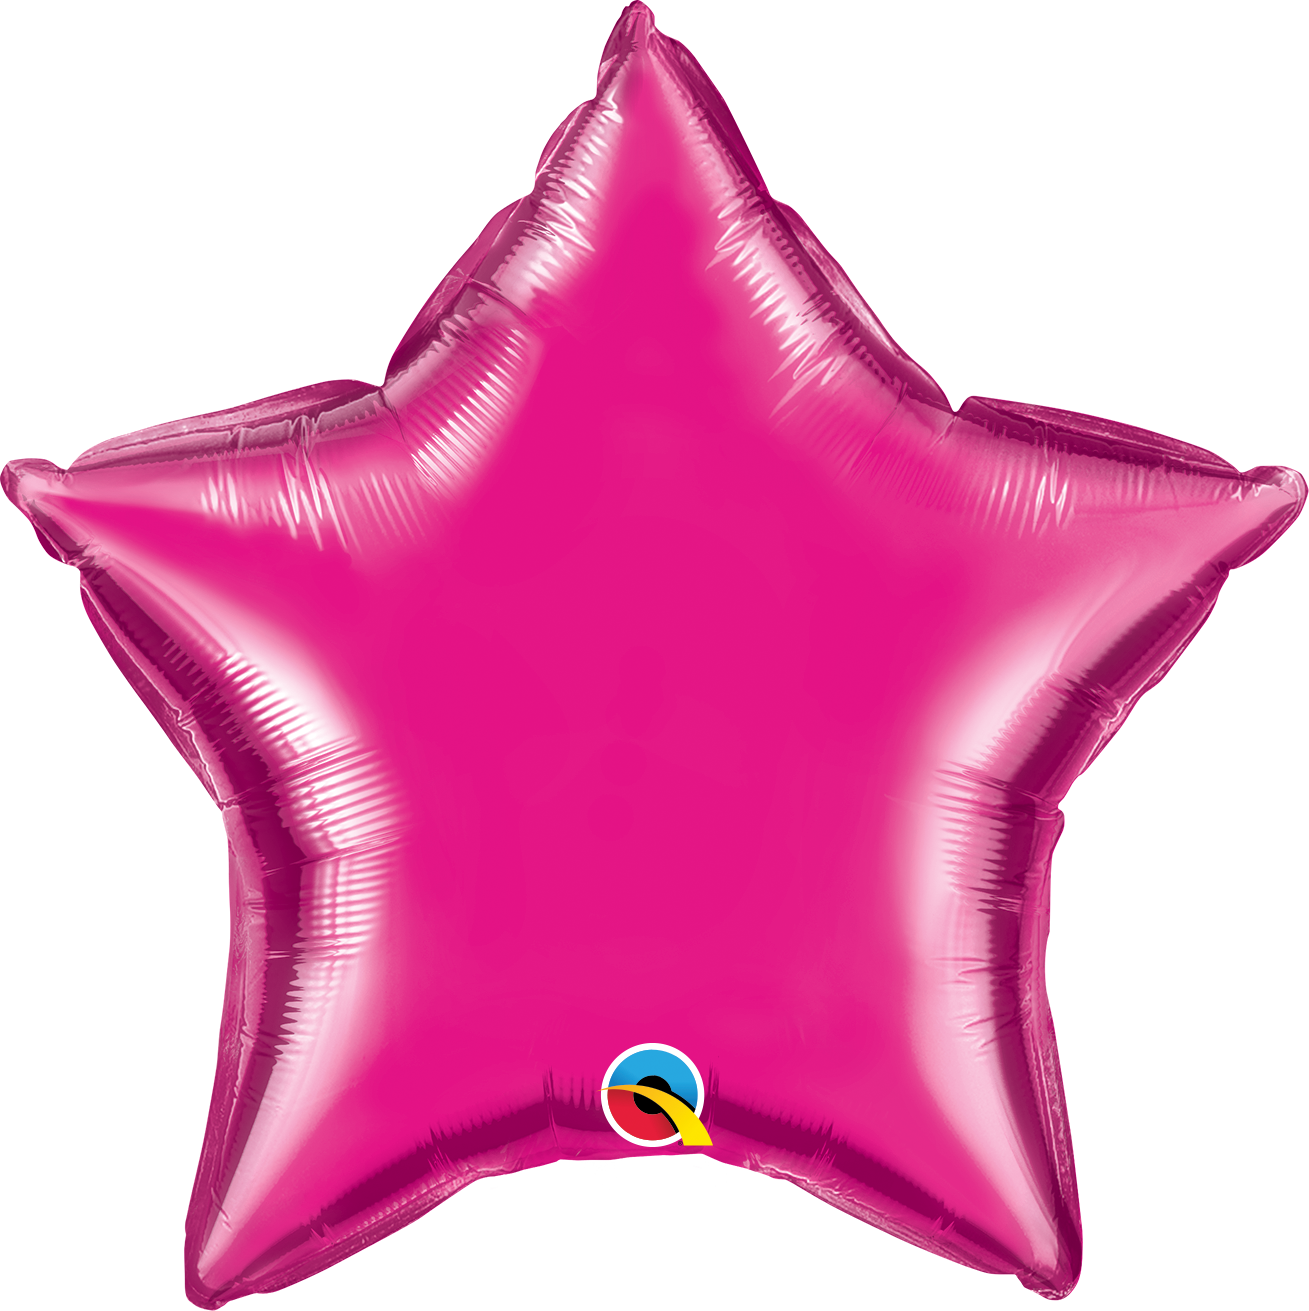 4" Qualatex Star Airfill Foil Balloon | 1 Count - Must Be Heat Sealed